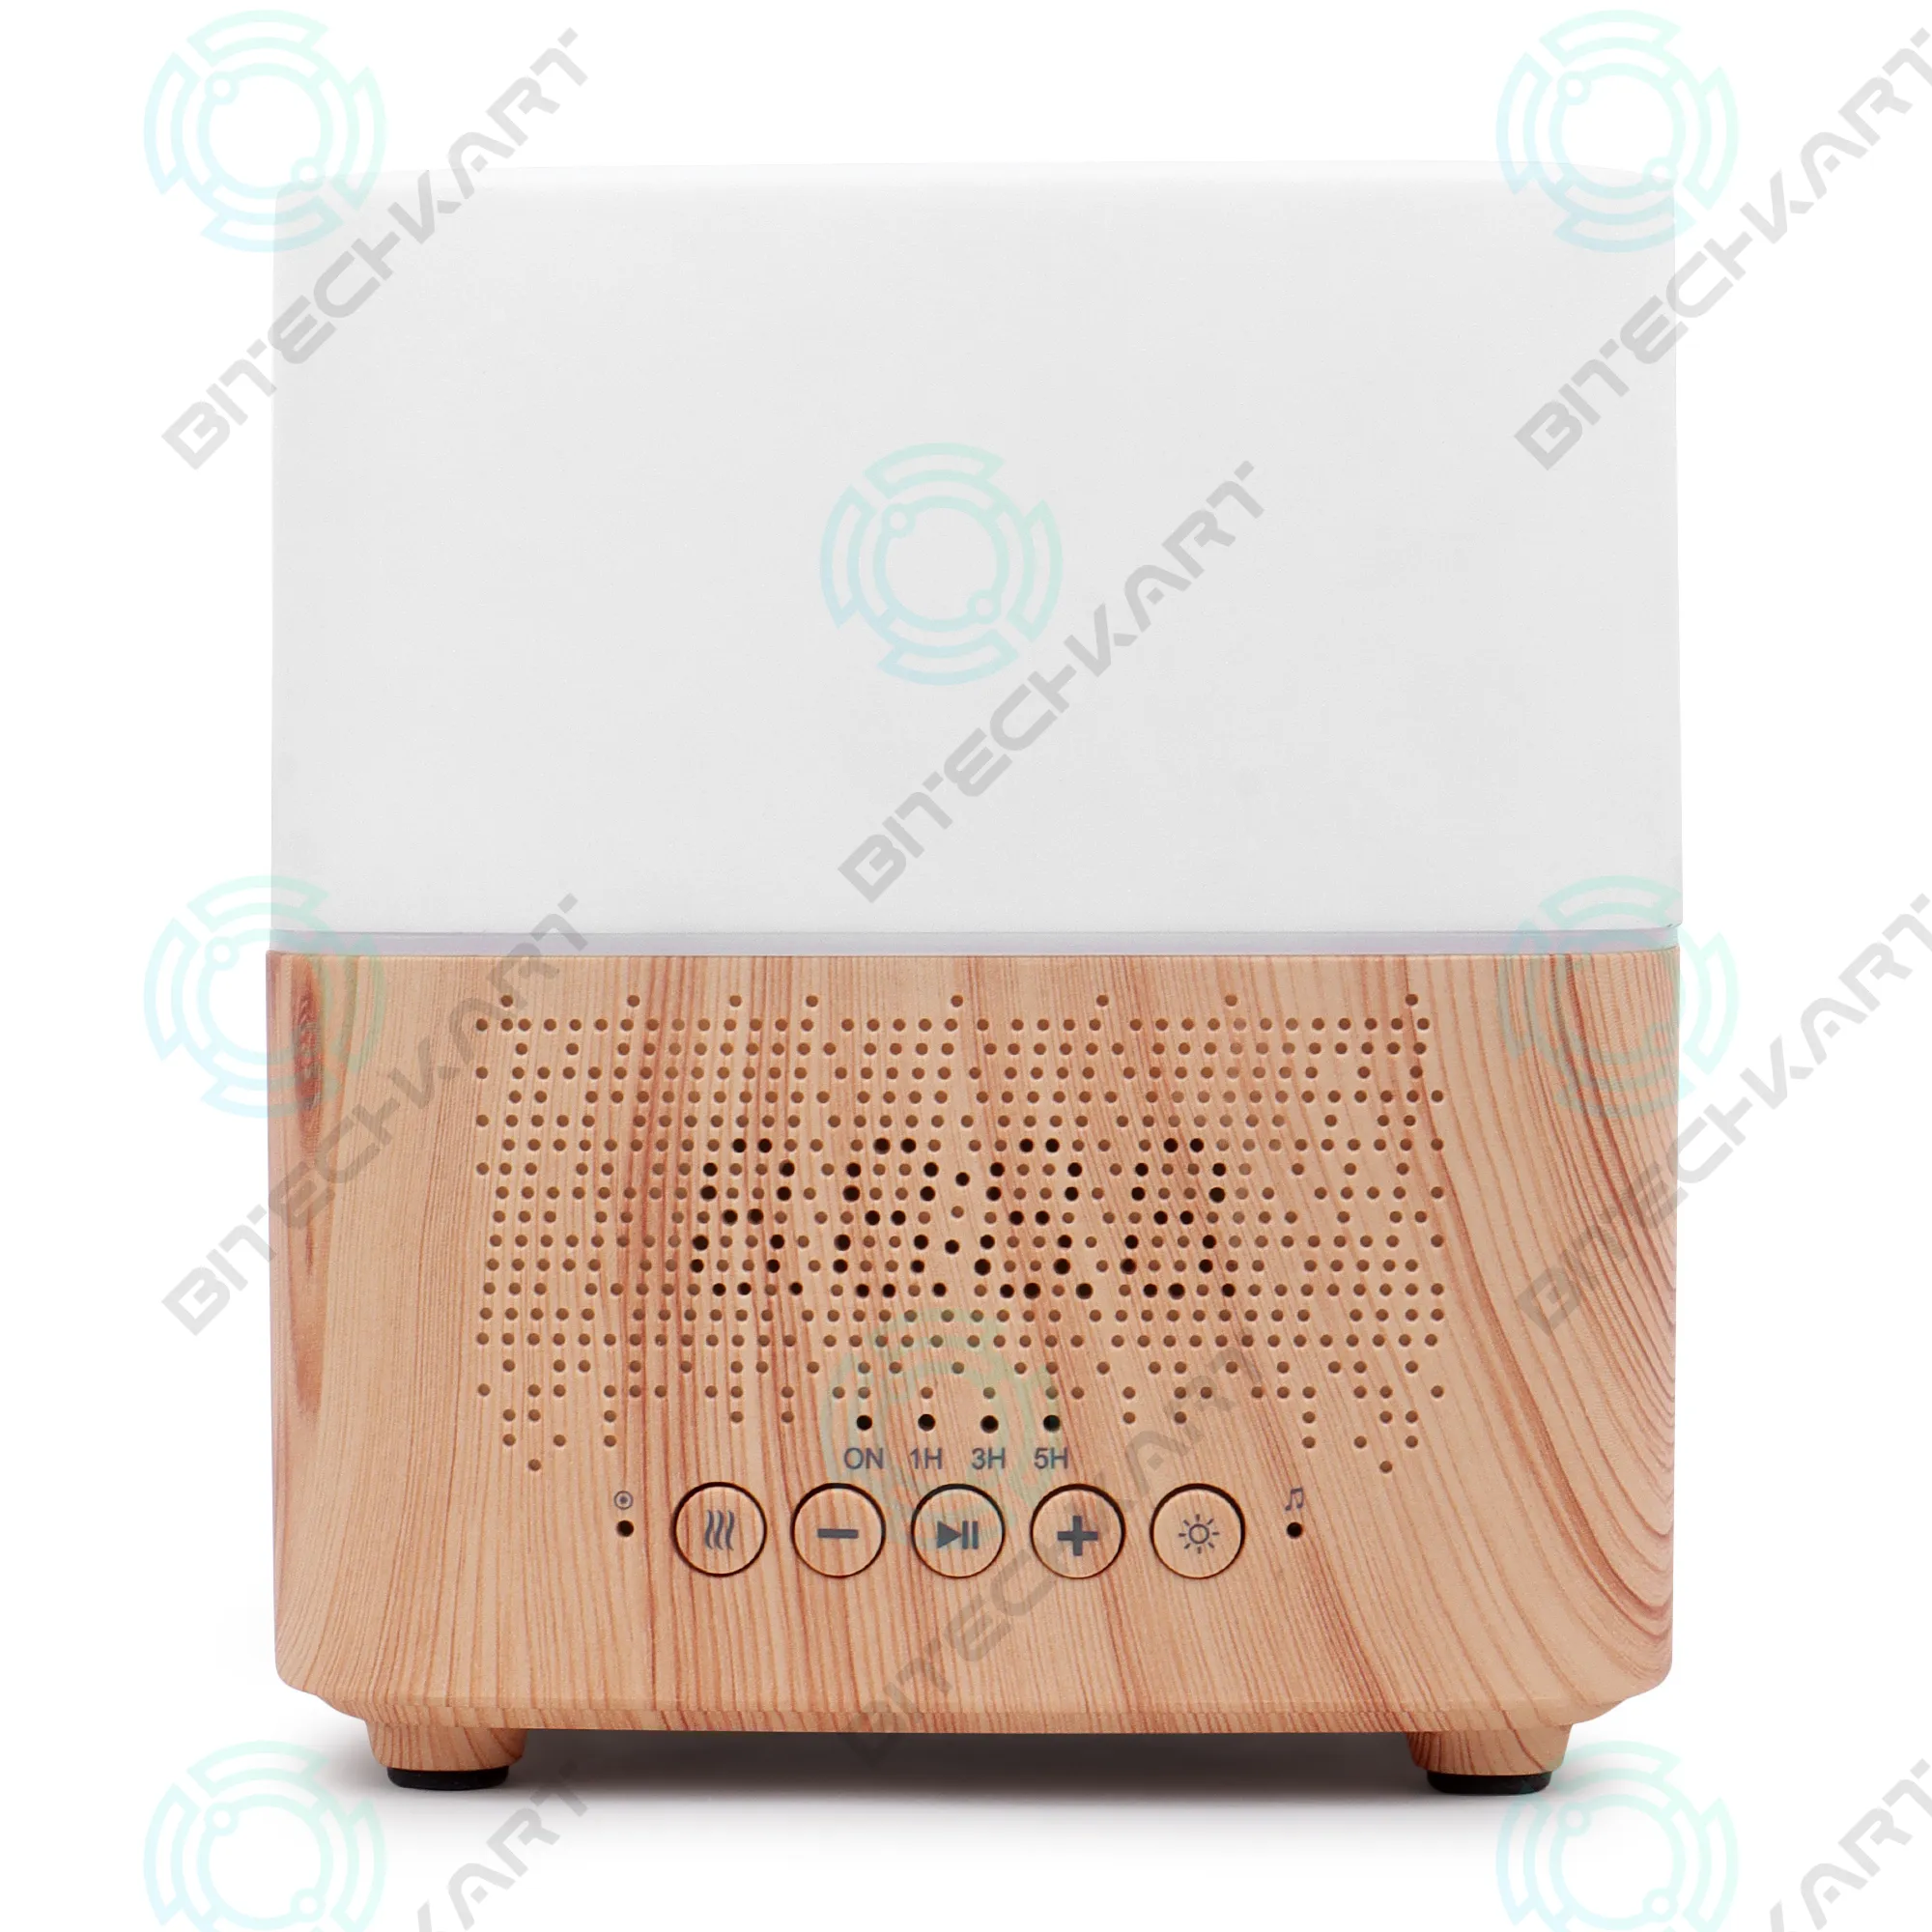 6-in-1 Aromatherapy Humidifier With Bluetooth Speaker and Clock